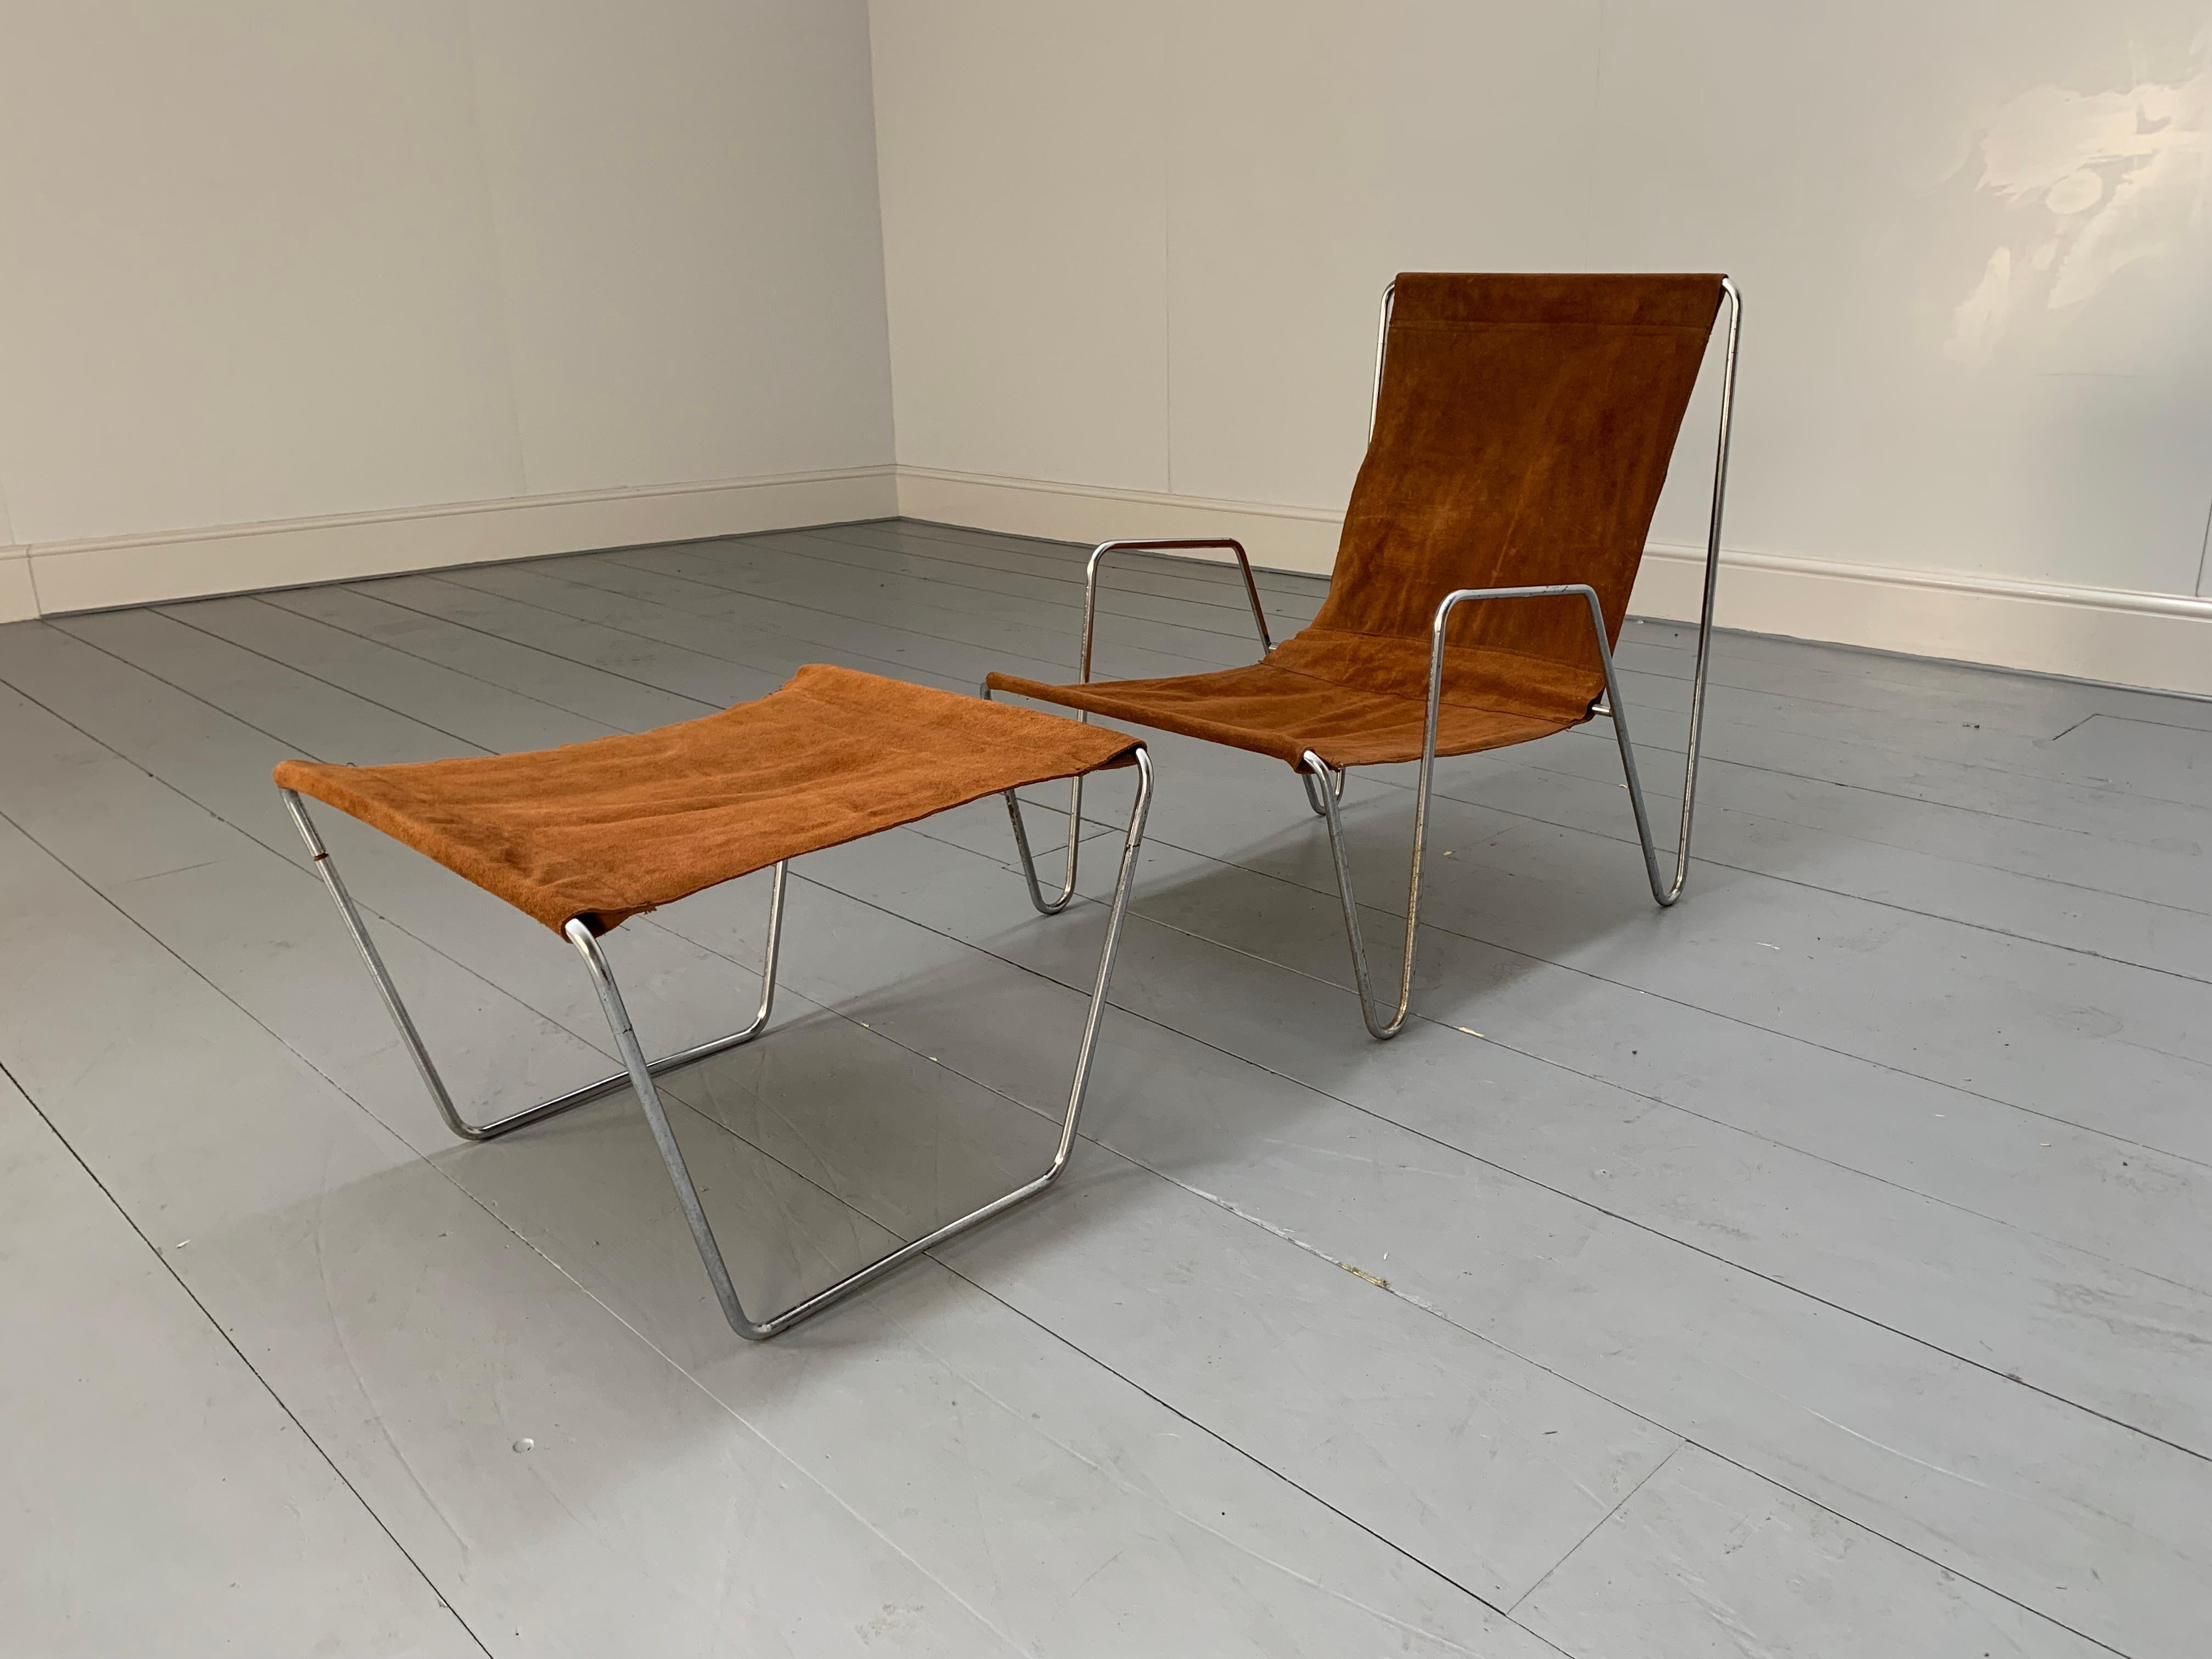 This is a rare “Bachelor” Lounge Chair and Footstool from the world renown Danish furniture house of Fritz Hansen.
 
In a world of temporary pleasures, Fritz Hansen create beautiful furniture that remains a joy forever. 
 
Dressed in the most